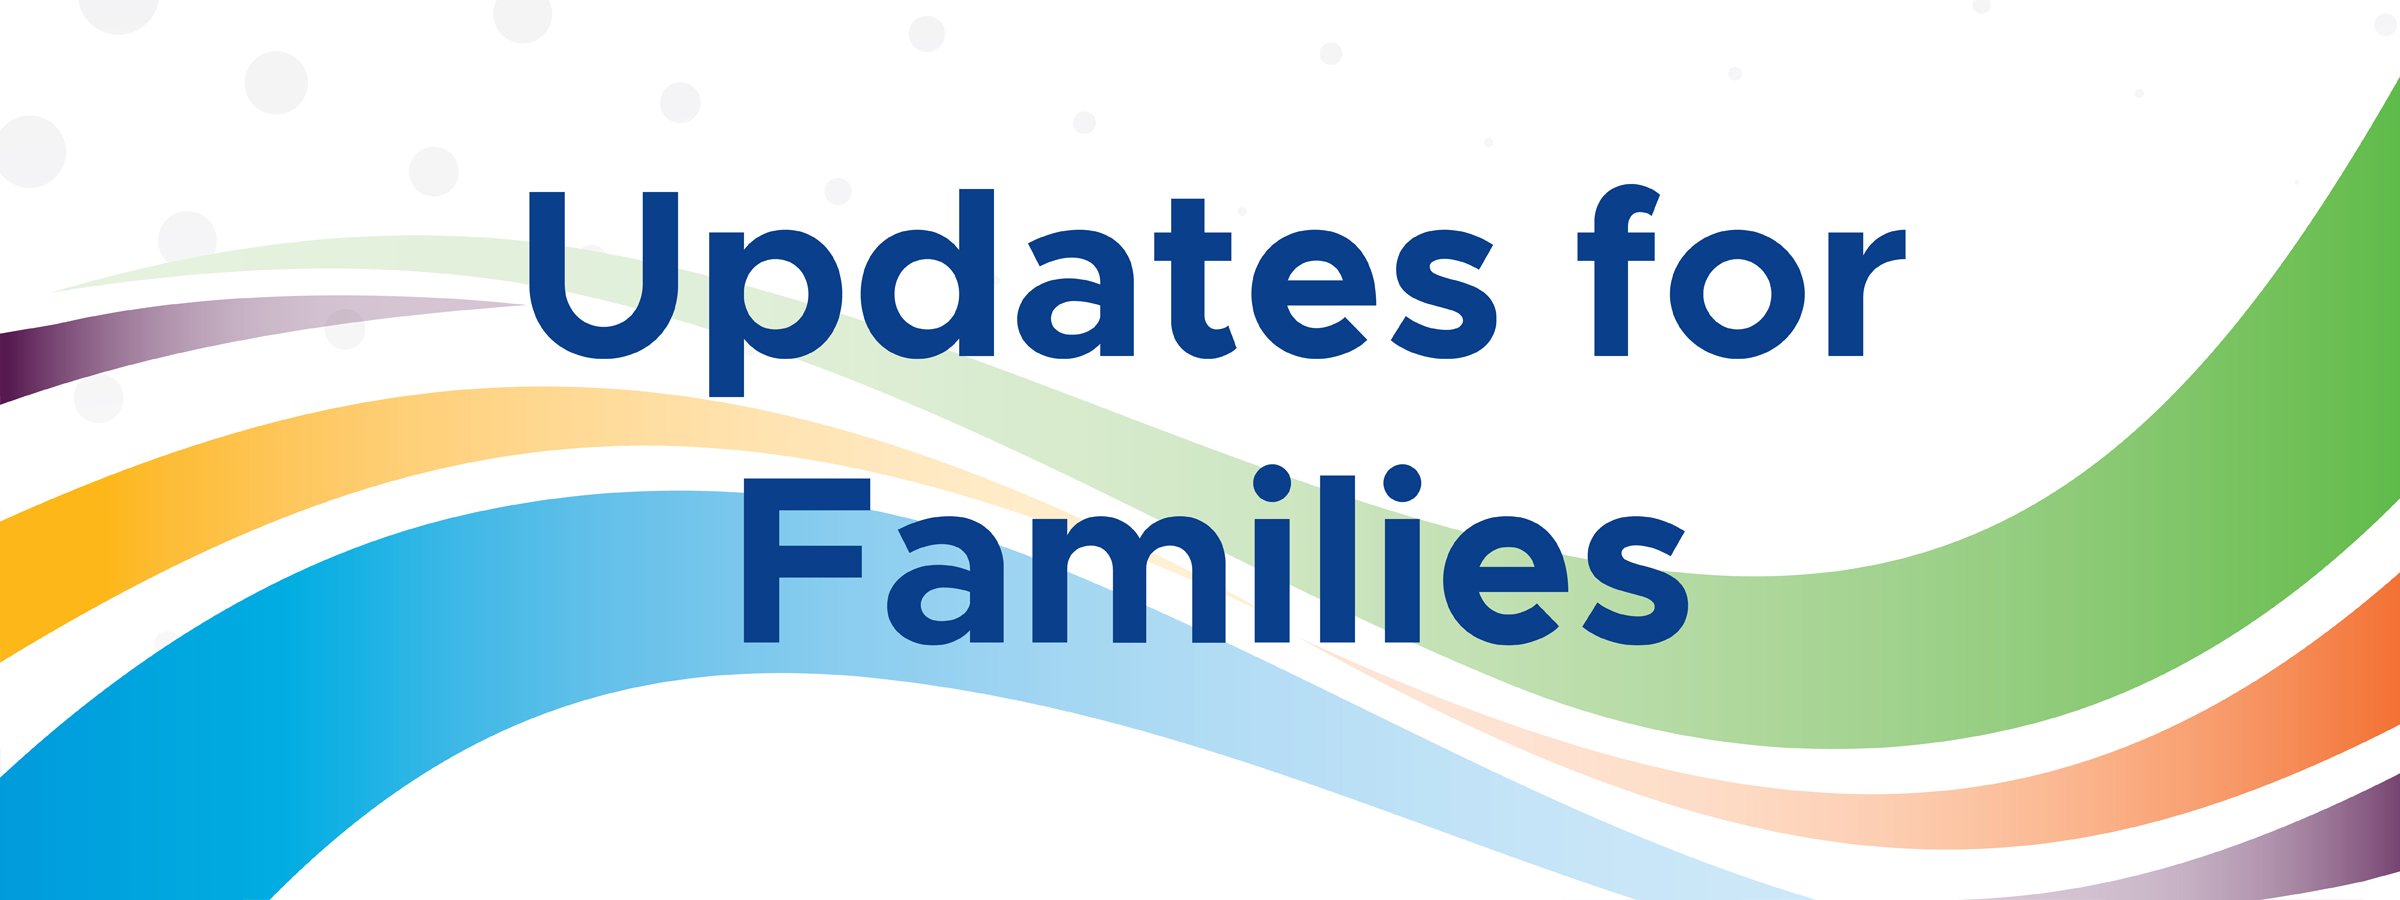 Updates for Families